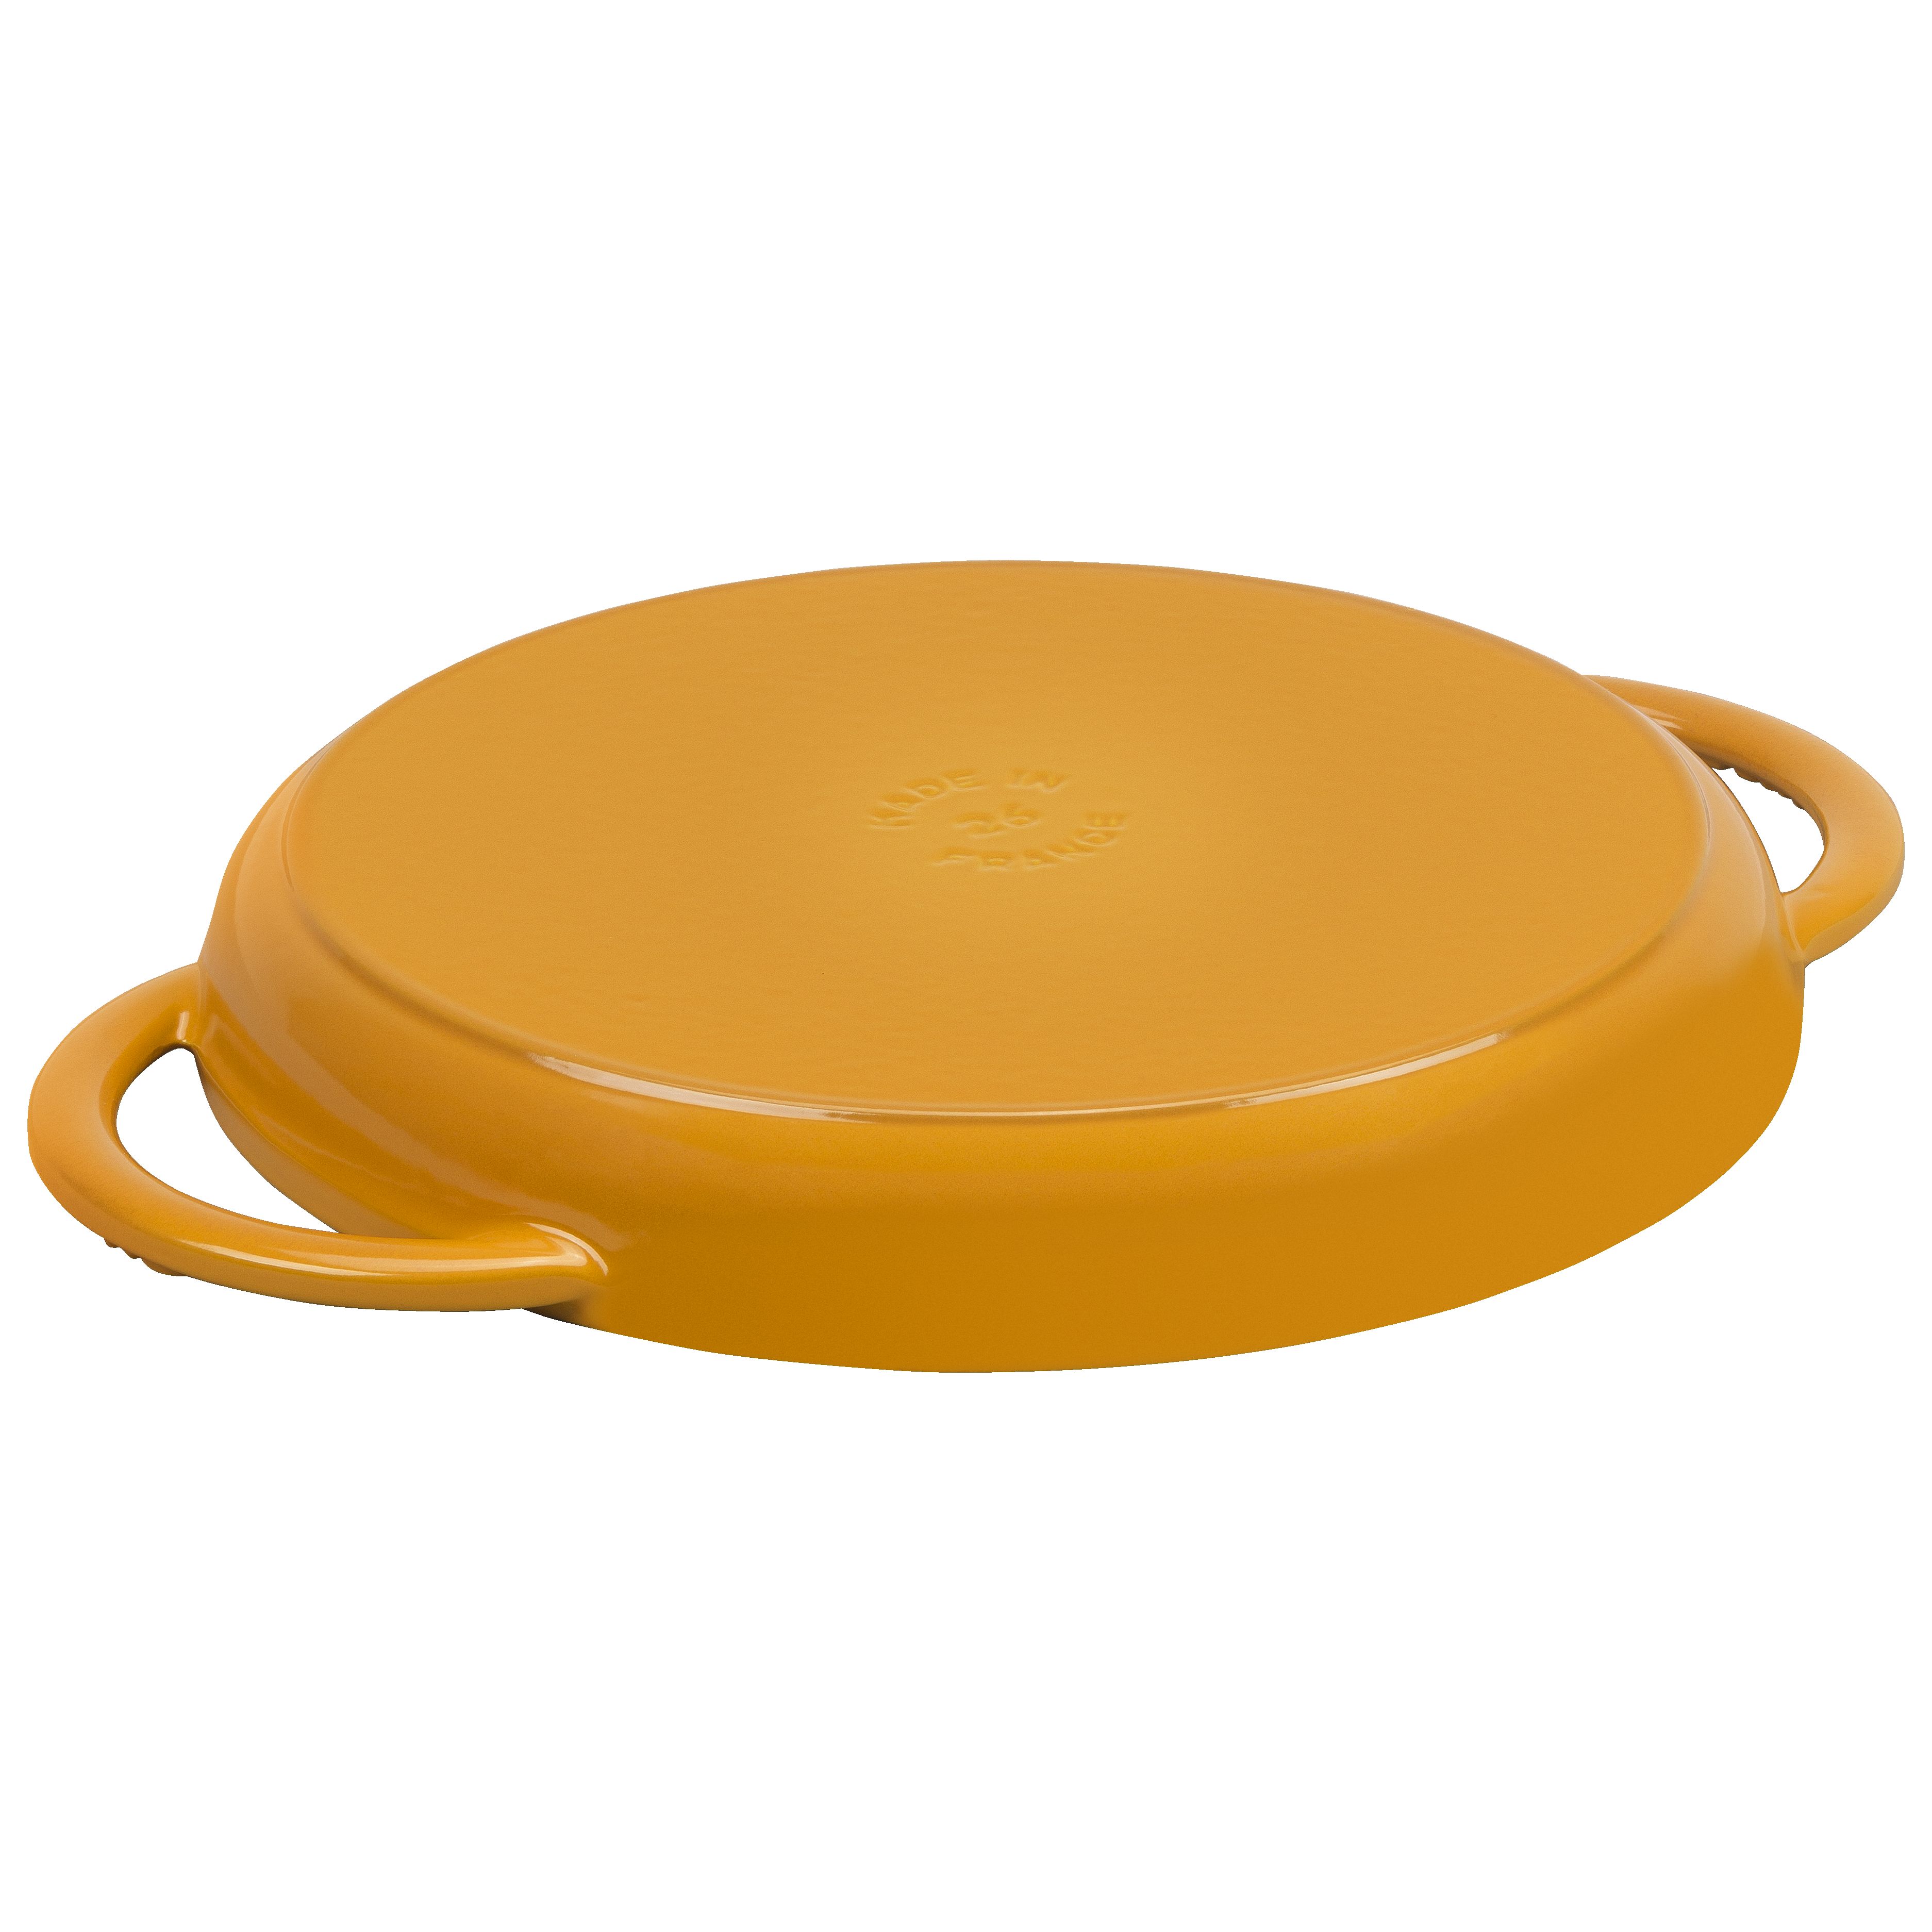 Le Chef Enameled Cast Iron Yellow Square Grill Pan 10 1/2-Inch